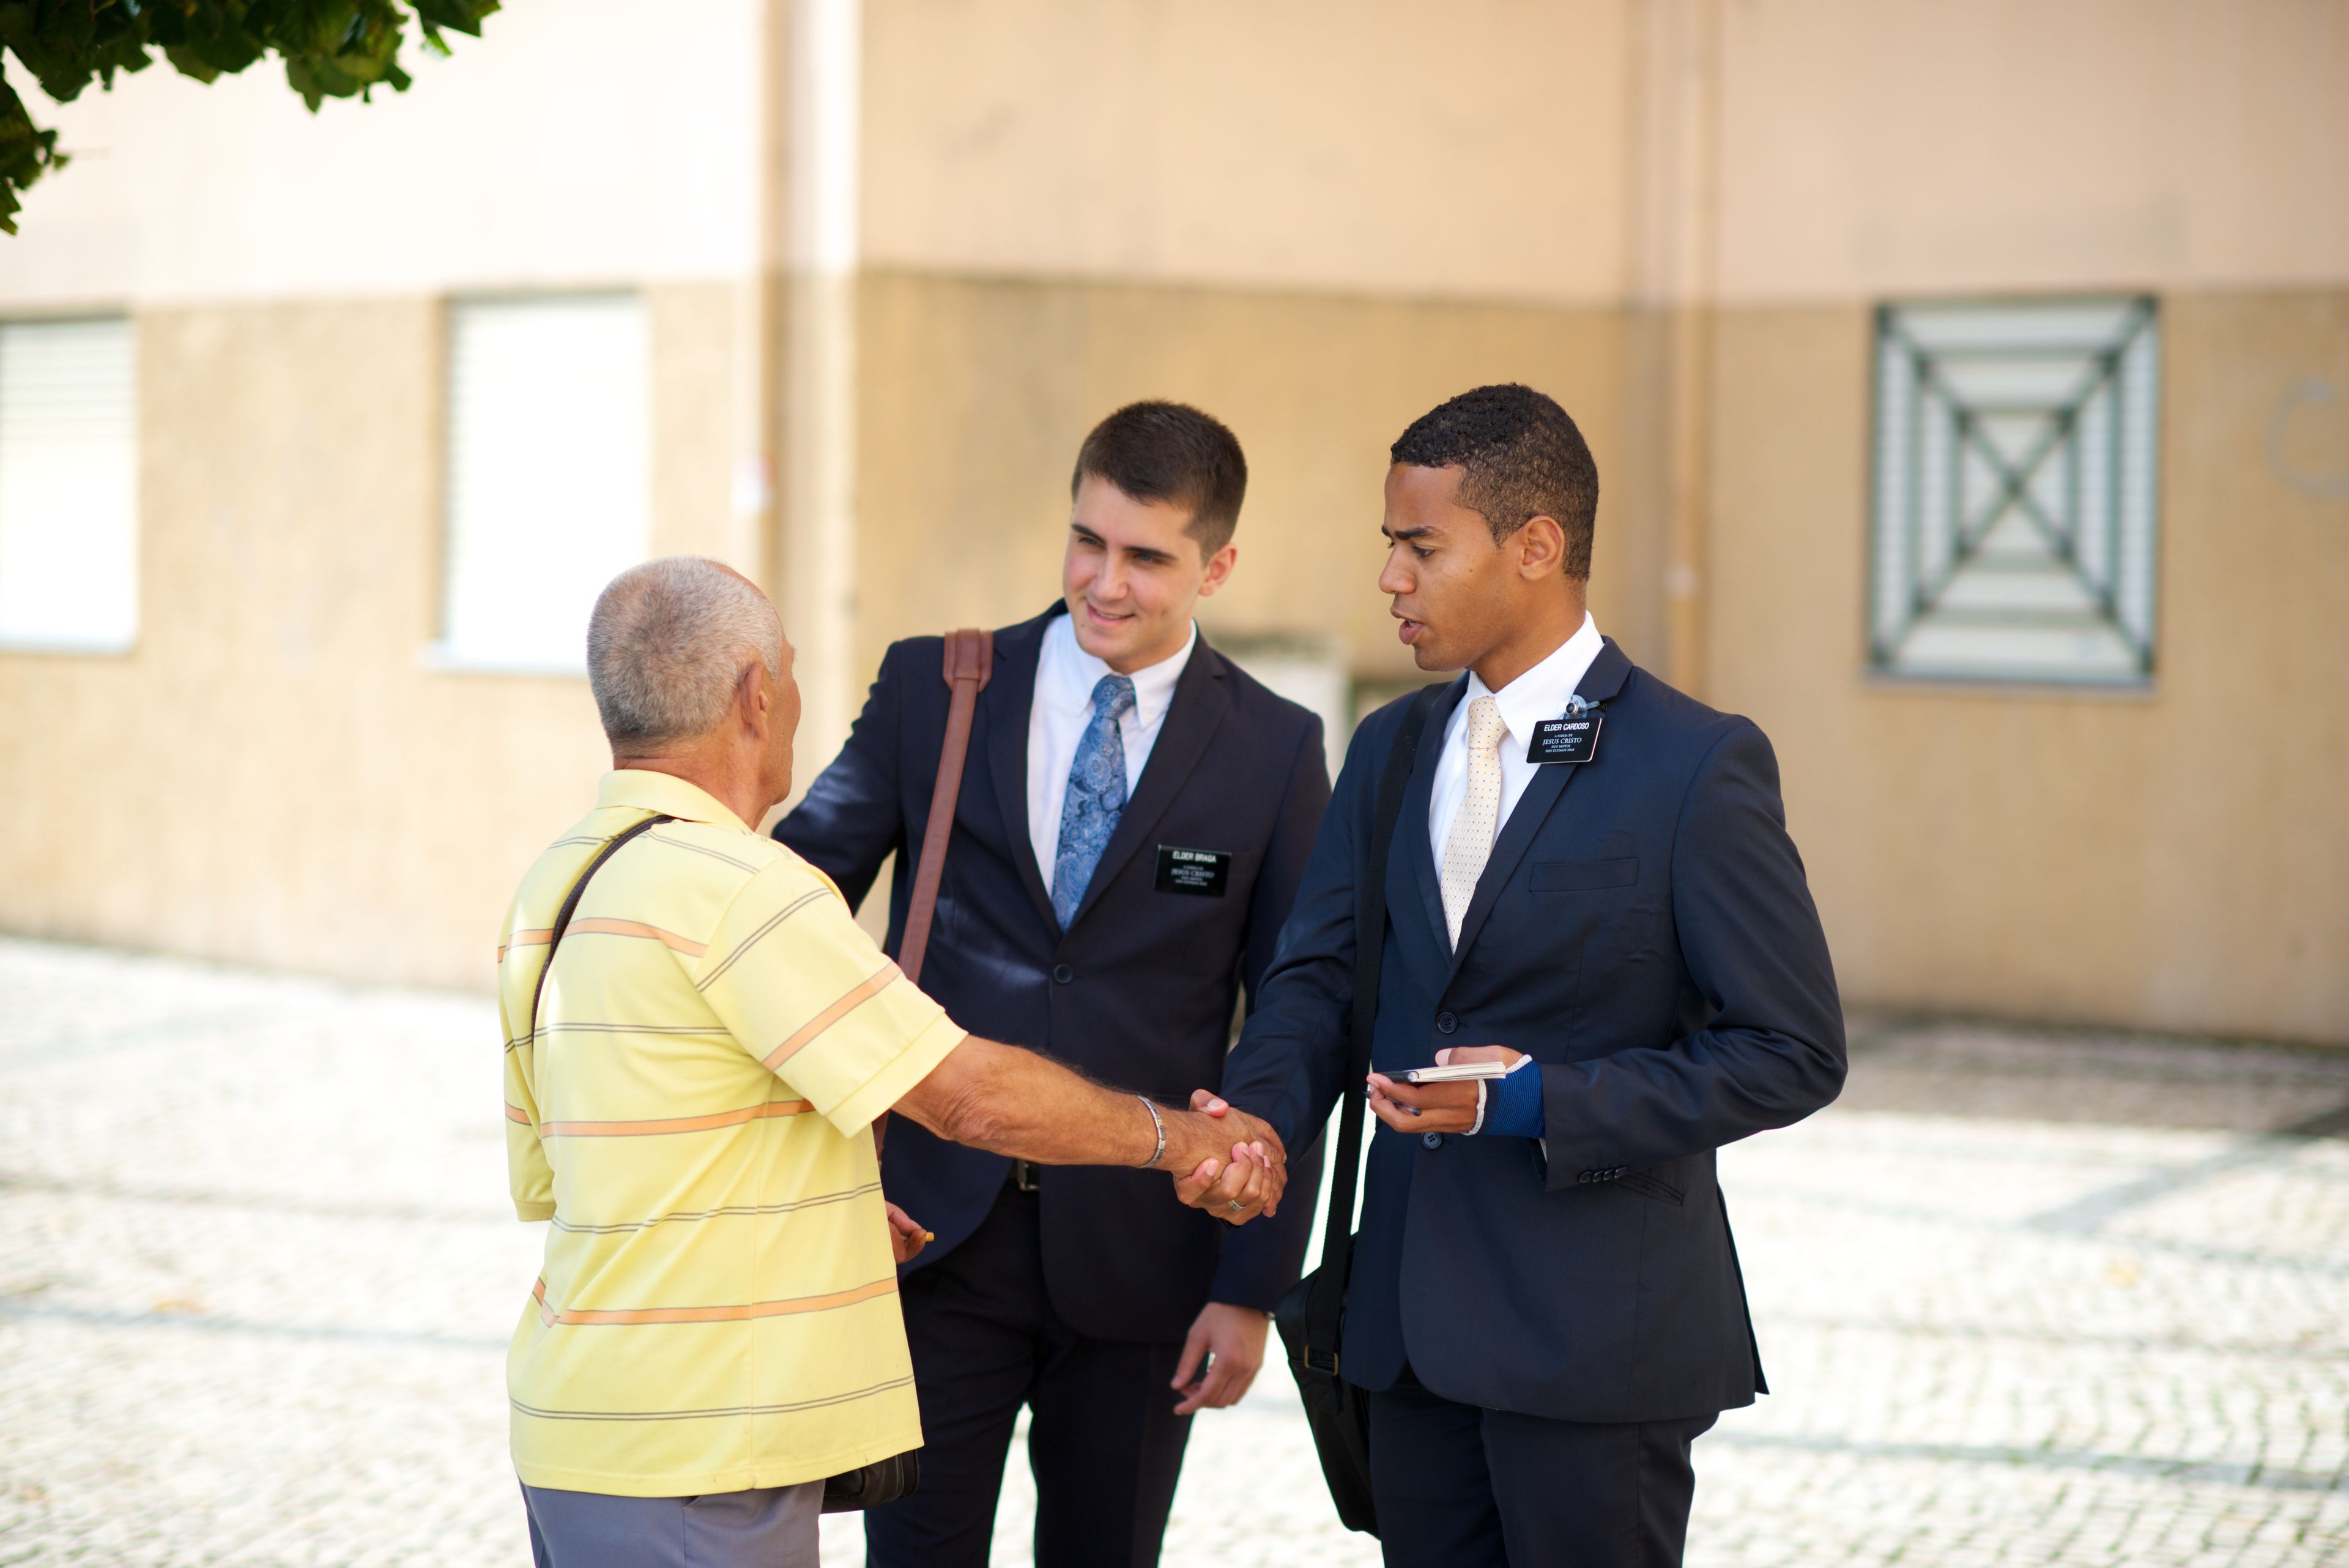 A man shaking hands with two elder missionaries in the street.